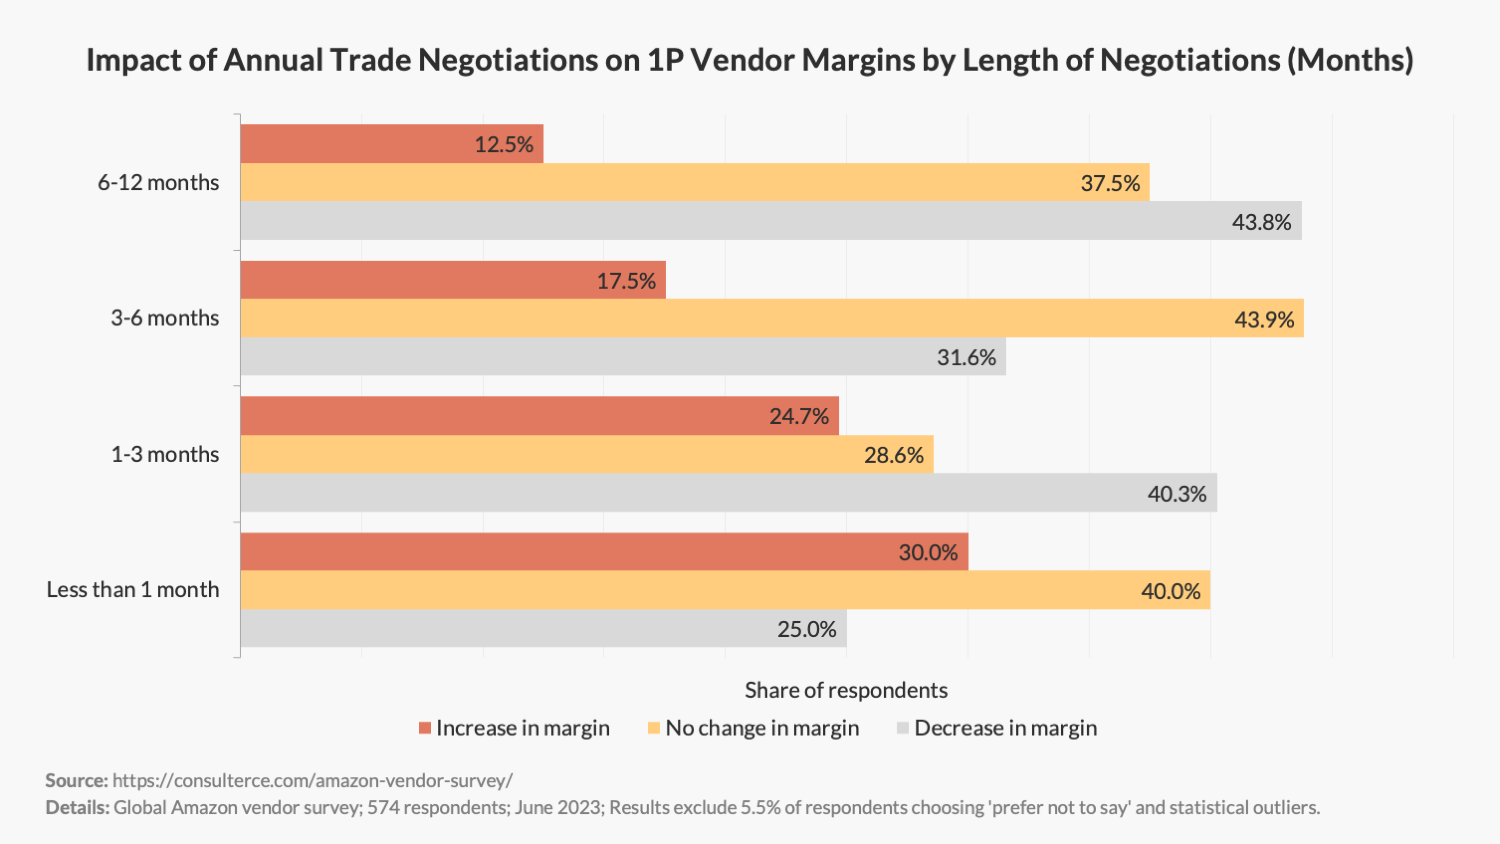 Impact of Annual Trade Negotiations on 1P Vendor Margins by Length of Negotiations in Months